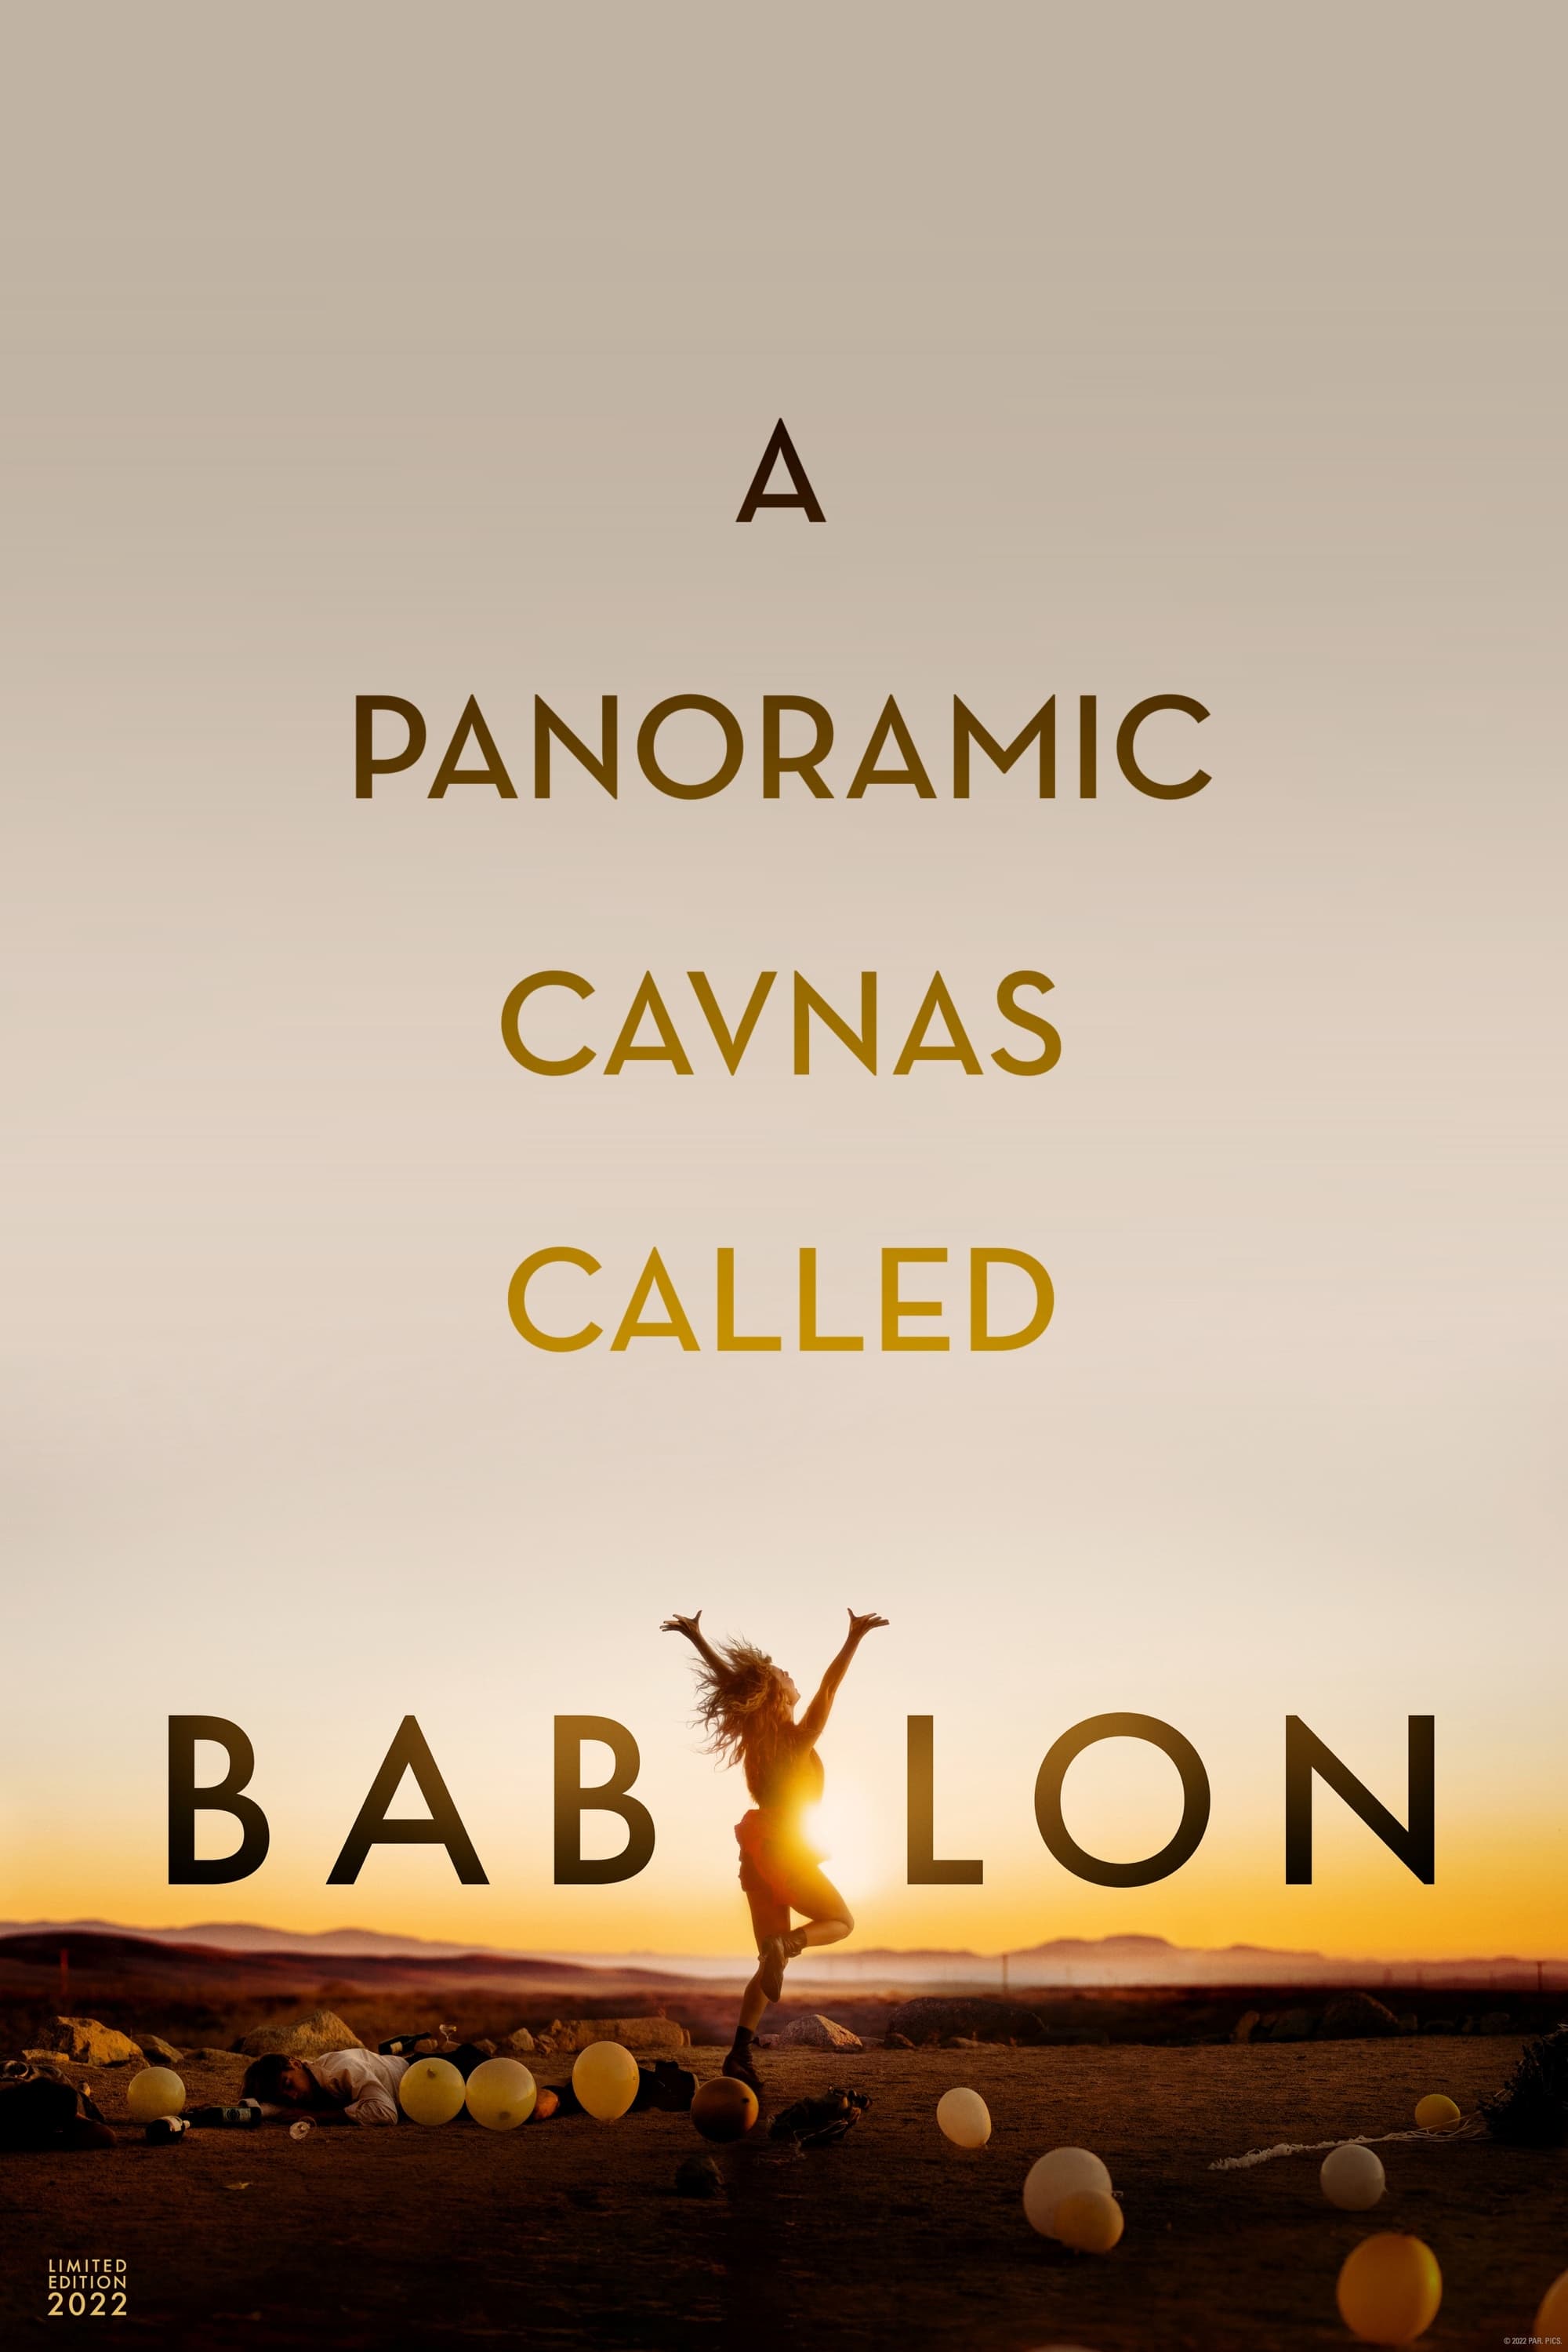 A Panoramic Canvas Called Babylon